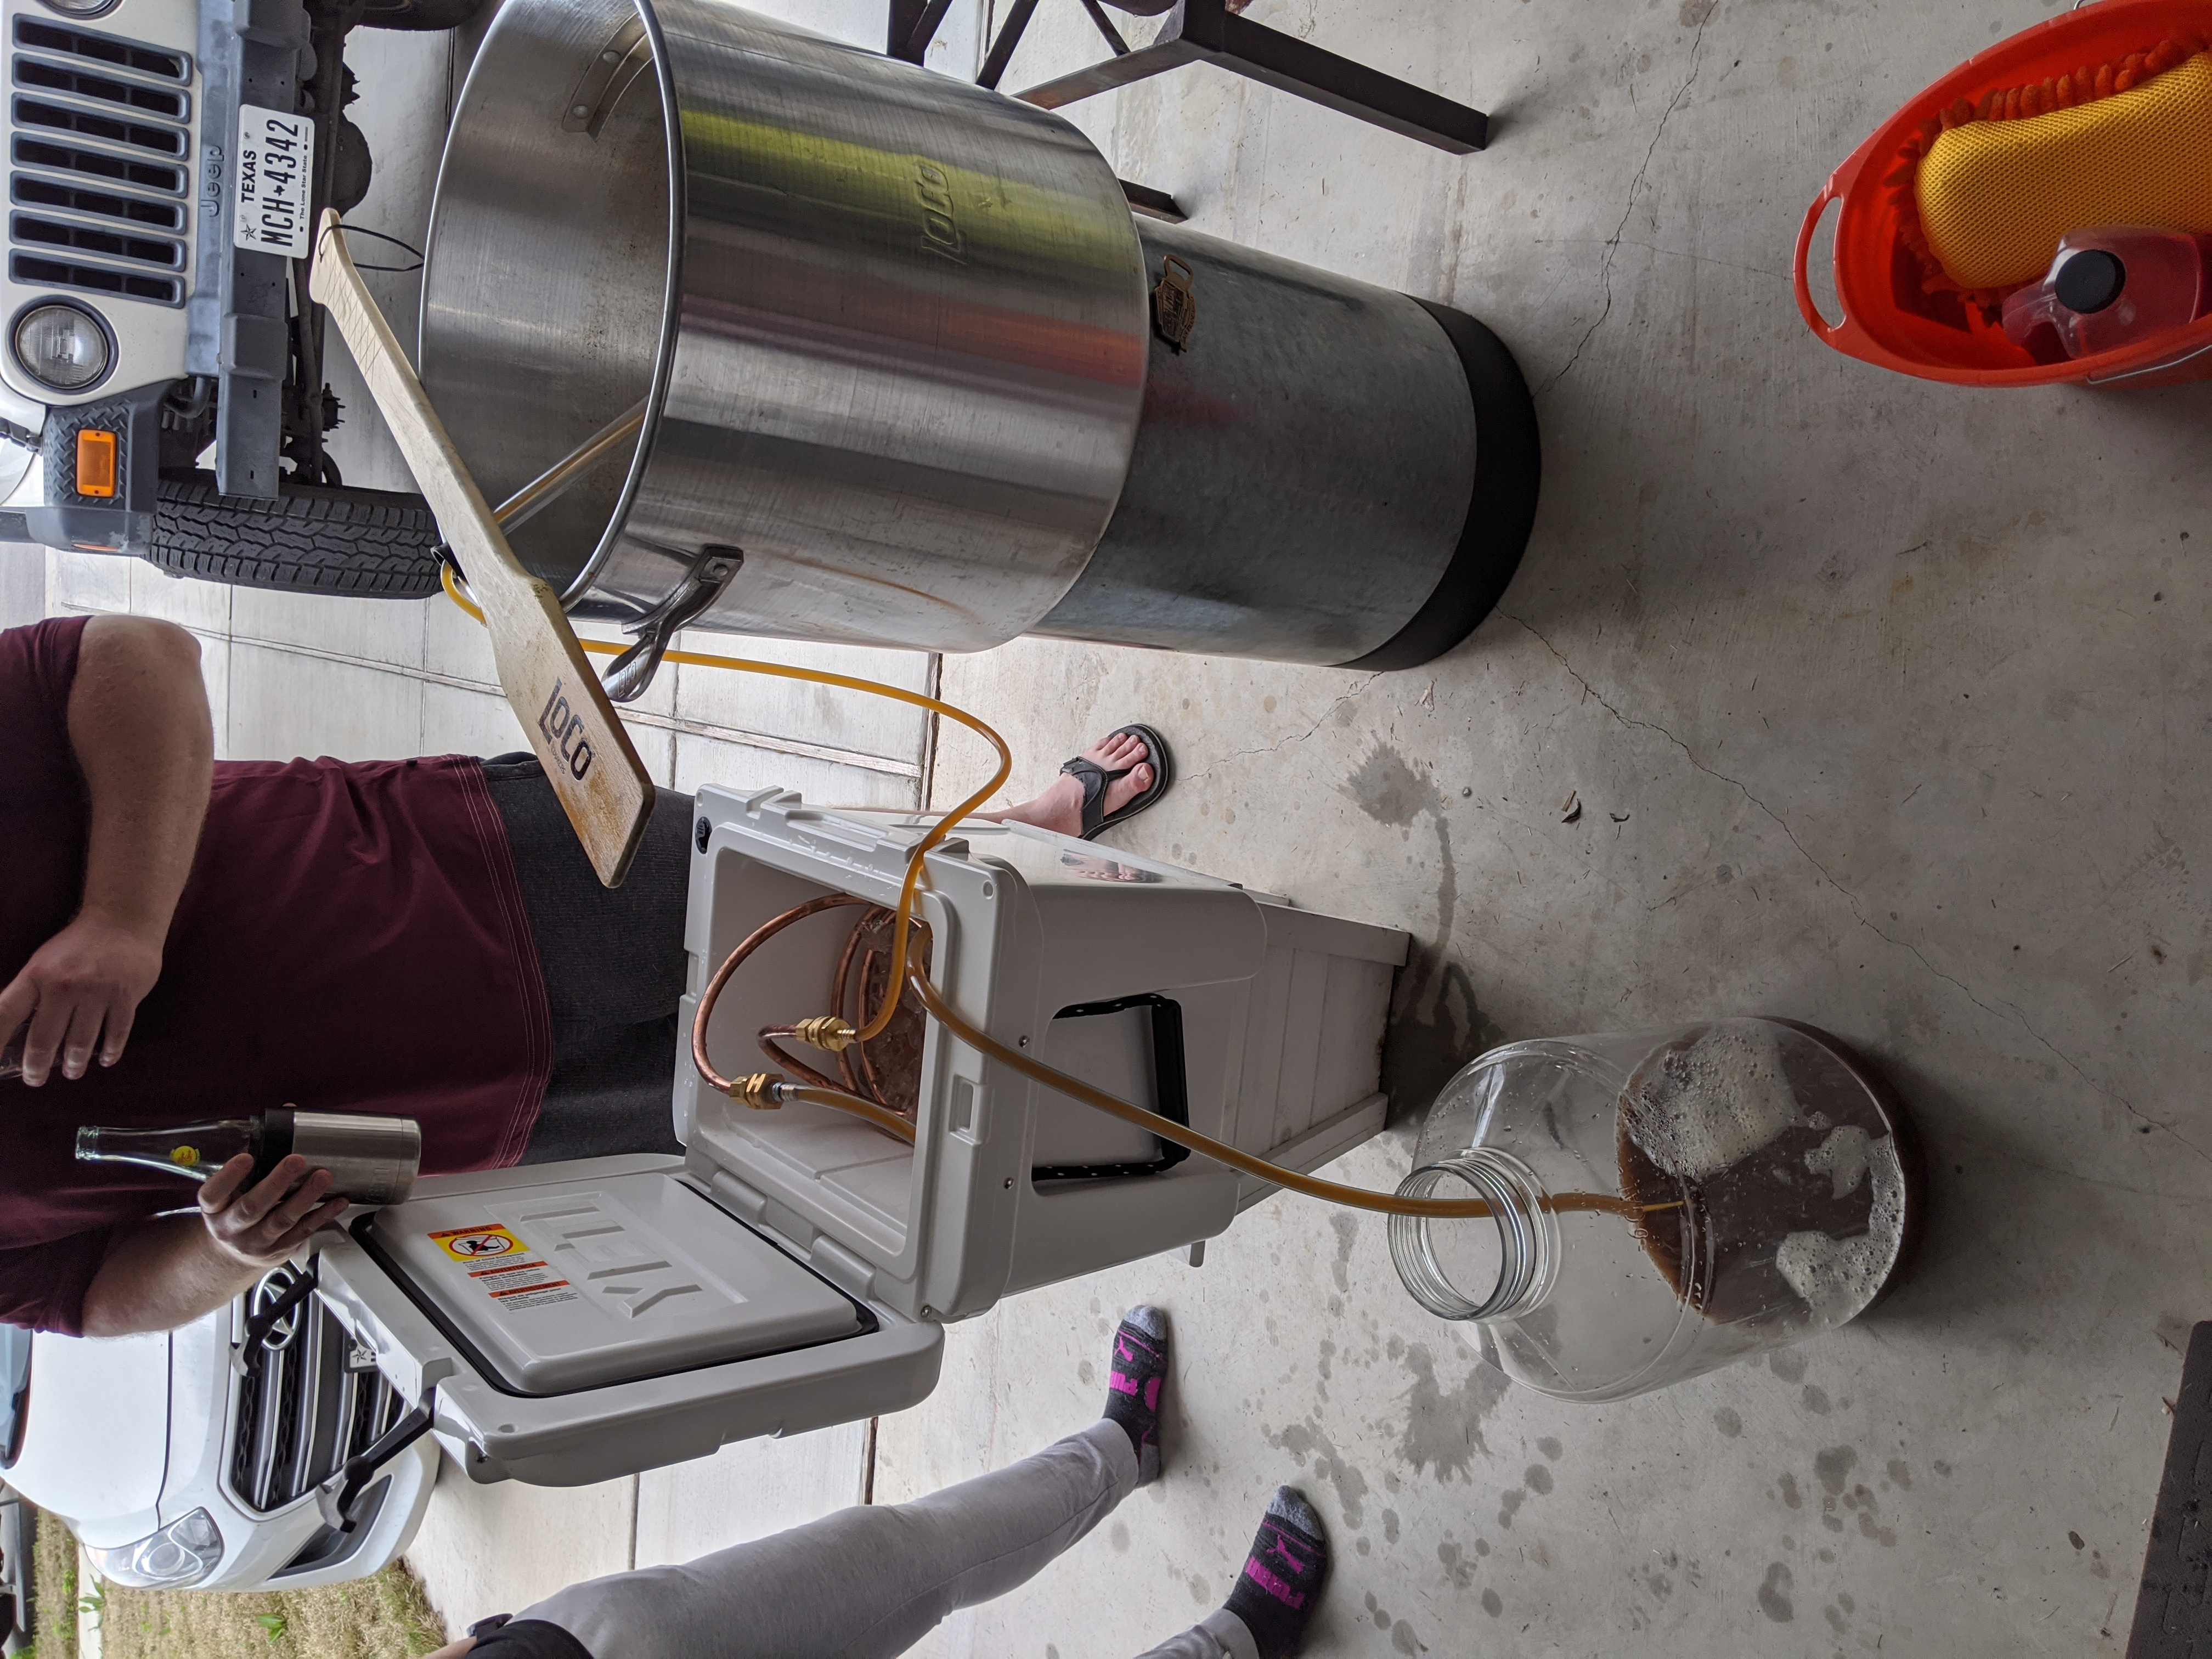 Wort chilling using our fancy copper chiller coil. In my opinion, this is our best equipment purchase so far.